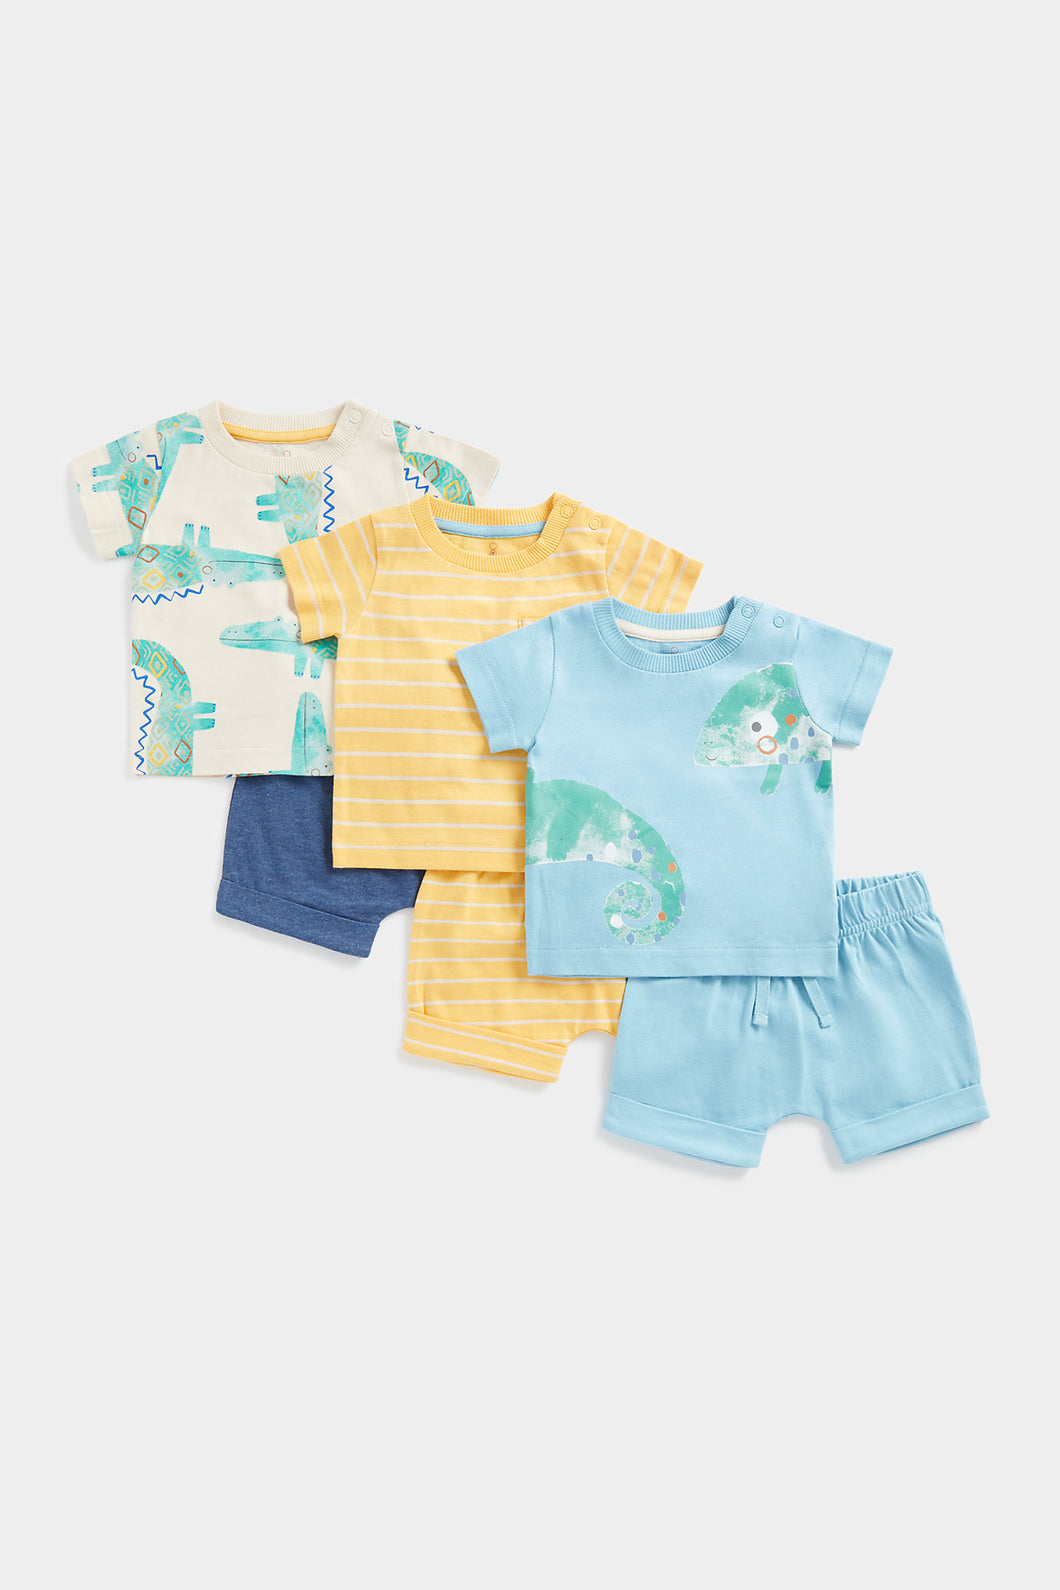 Mothercare Tropical T-Shirts And Shorts - 6 Piece